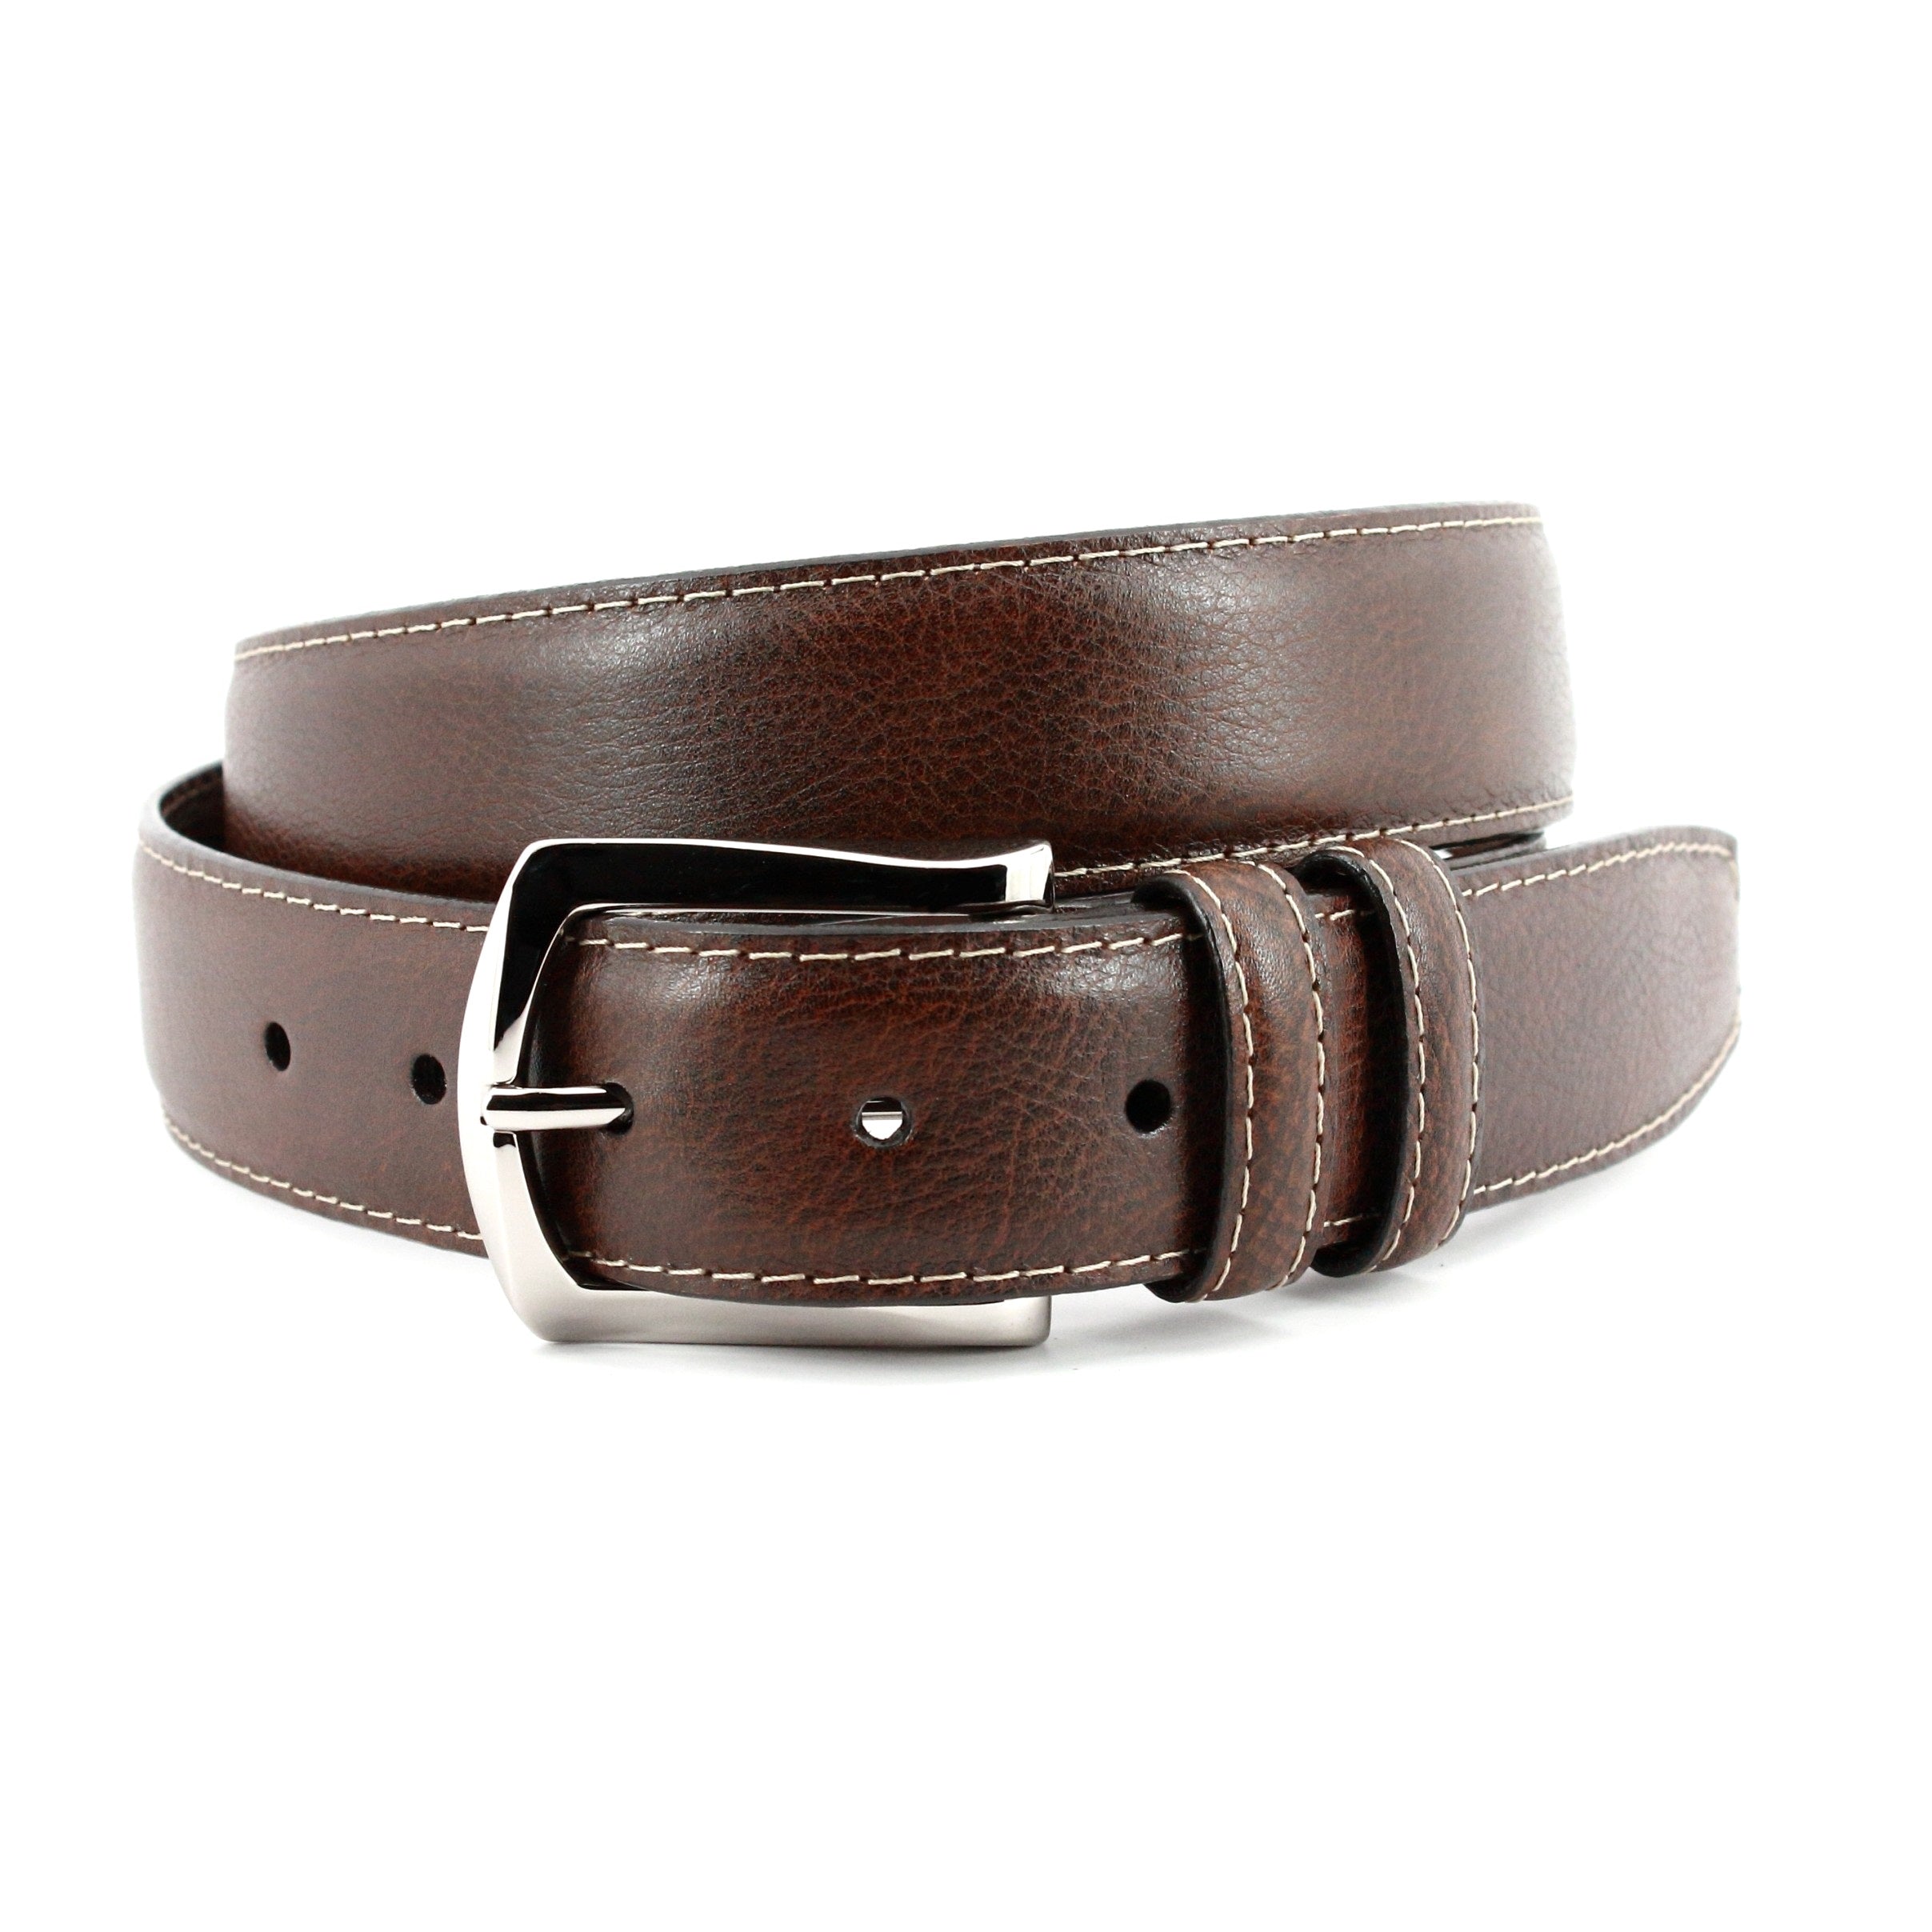 Italian Woven Stretch Leather Belt in Cognac by Torino Leather